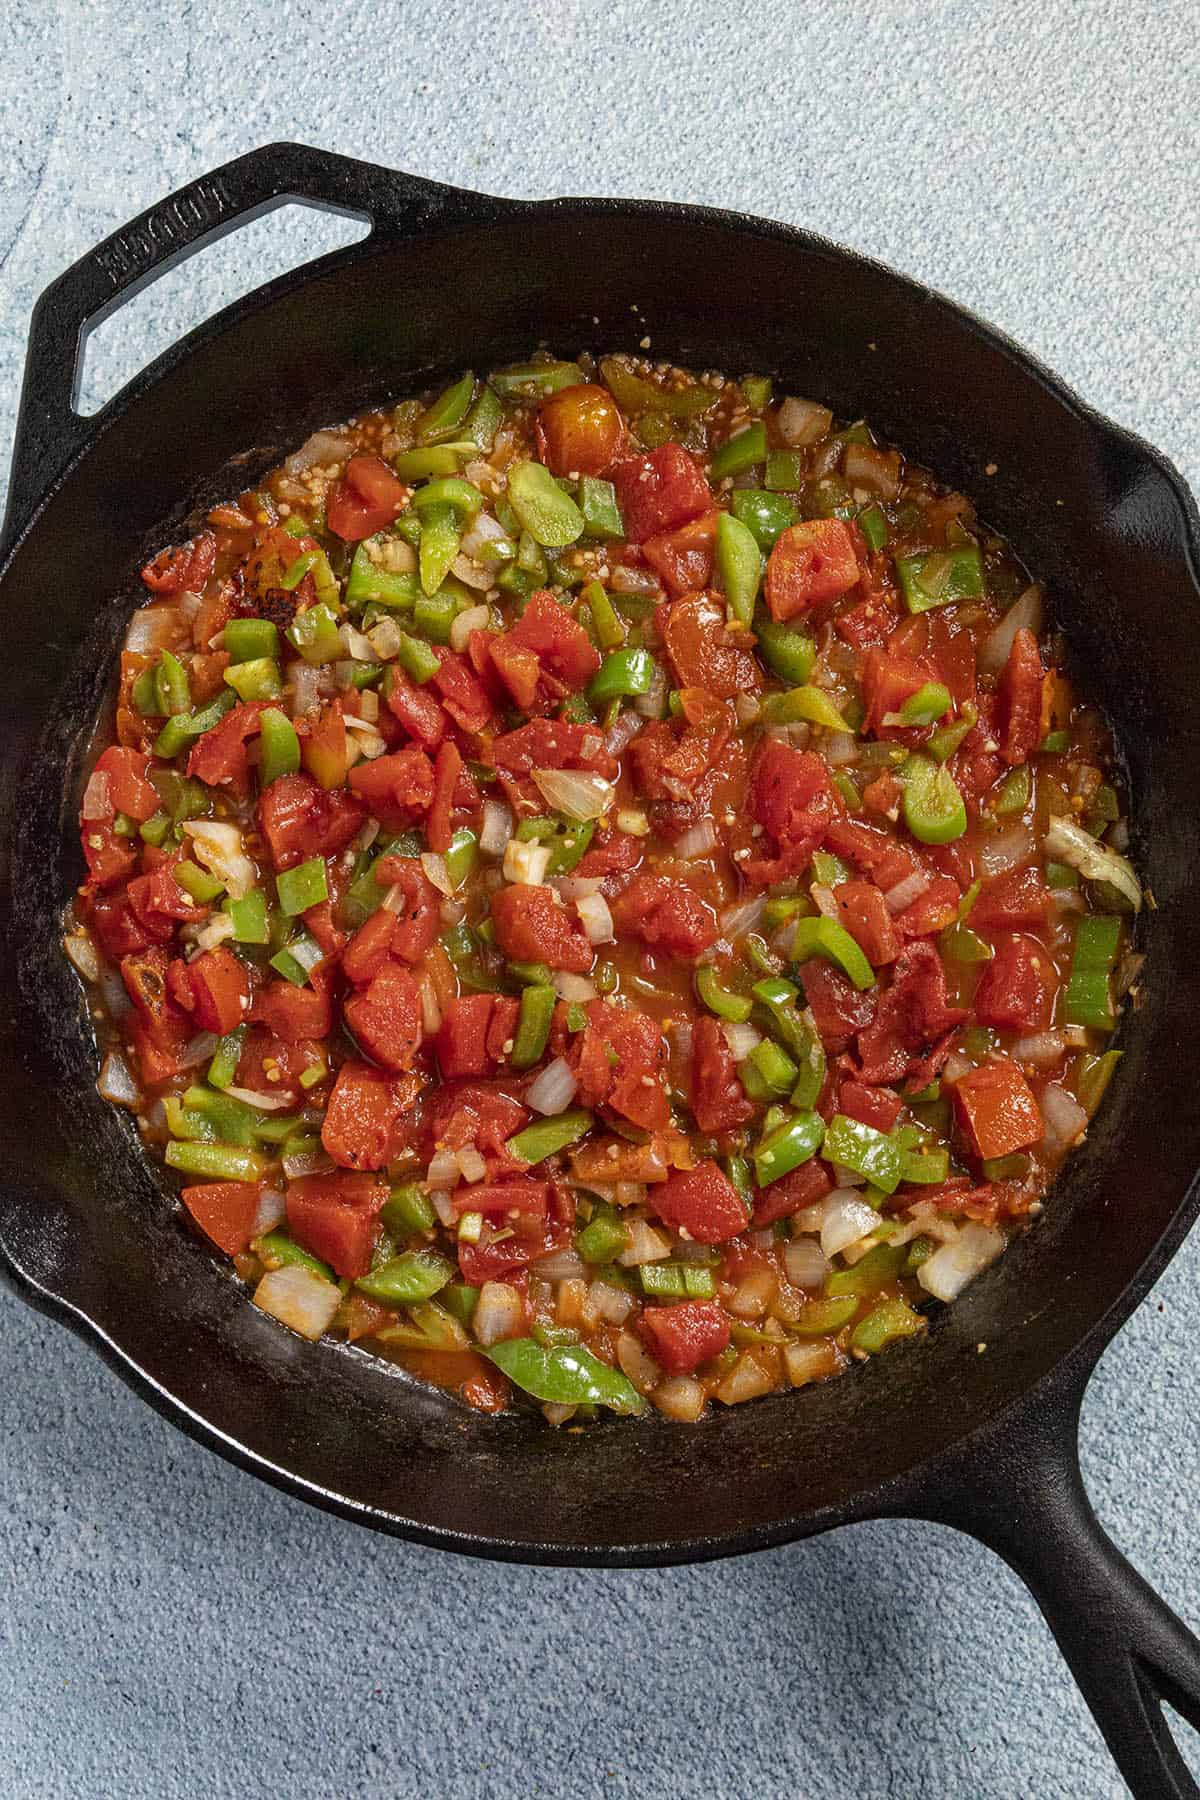 Simmering tomato sauce in a pan to make Ratatouille